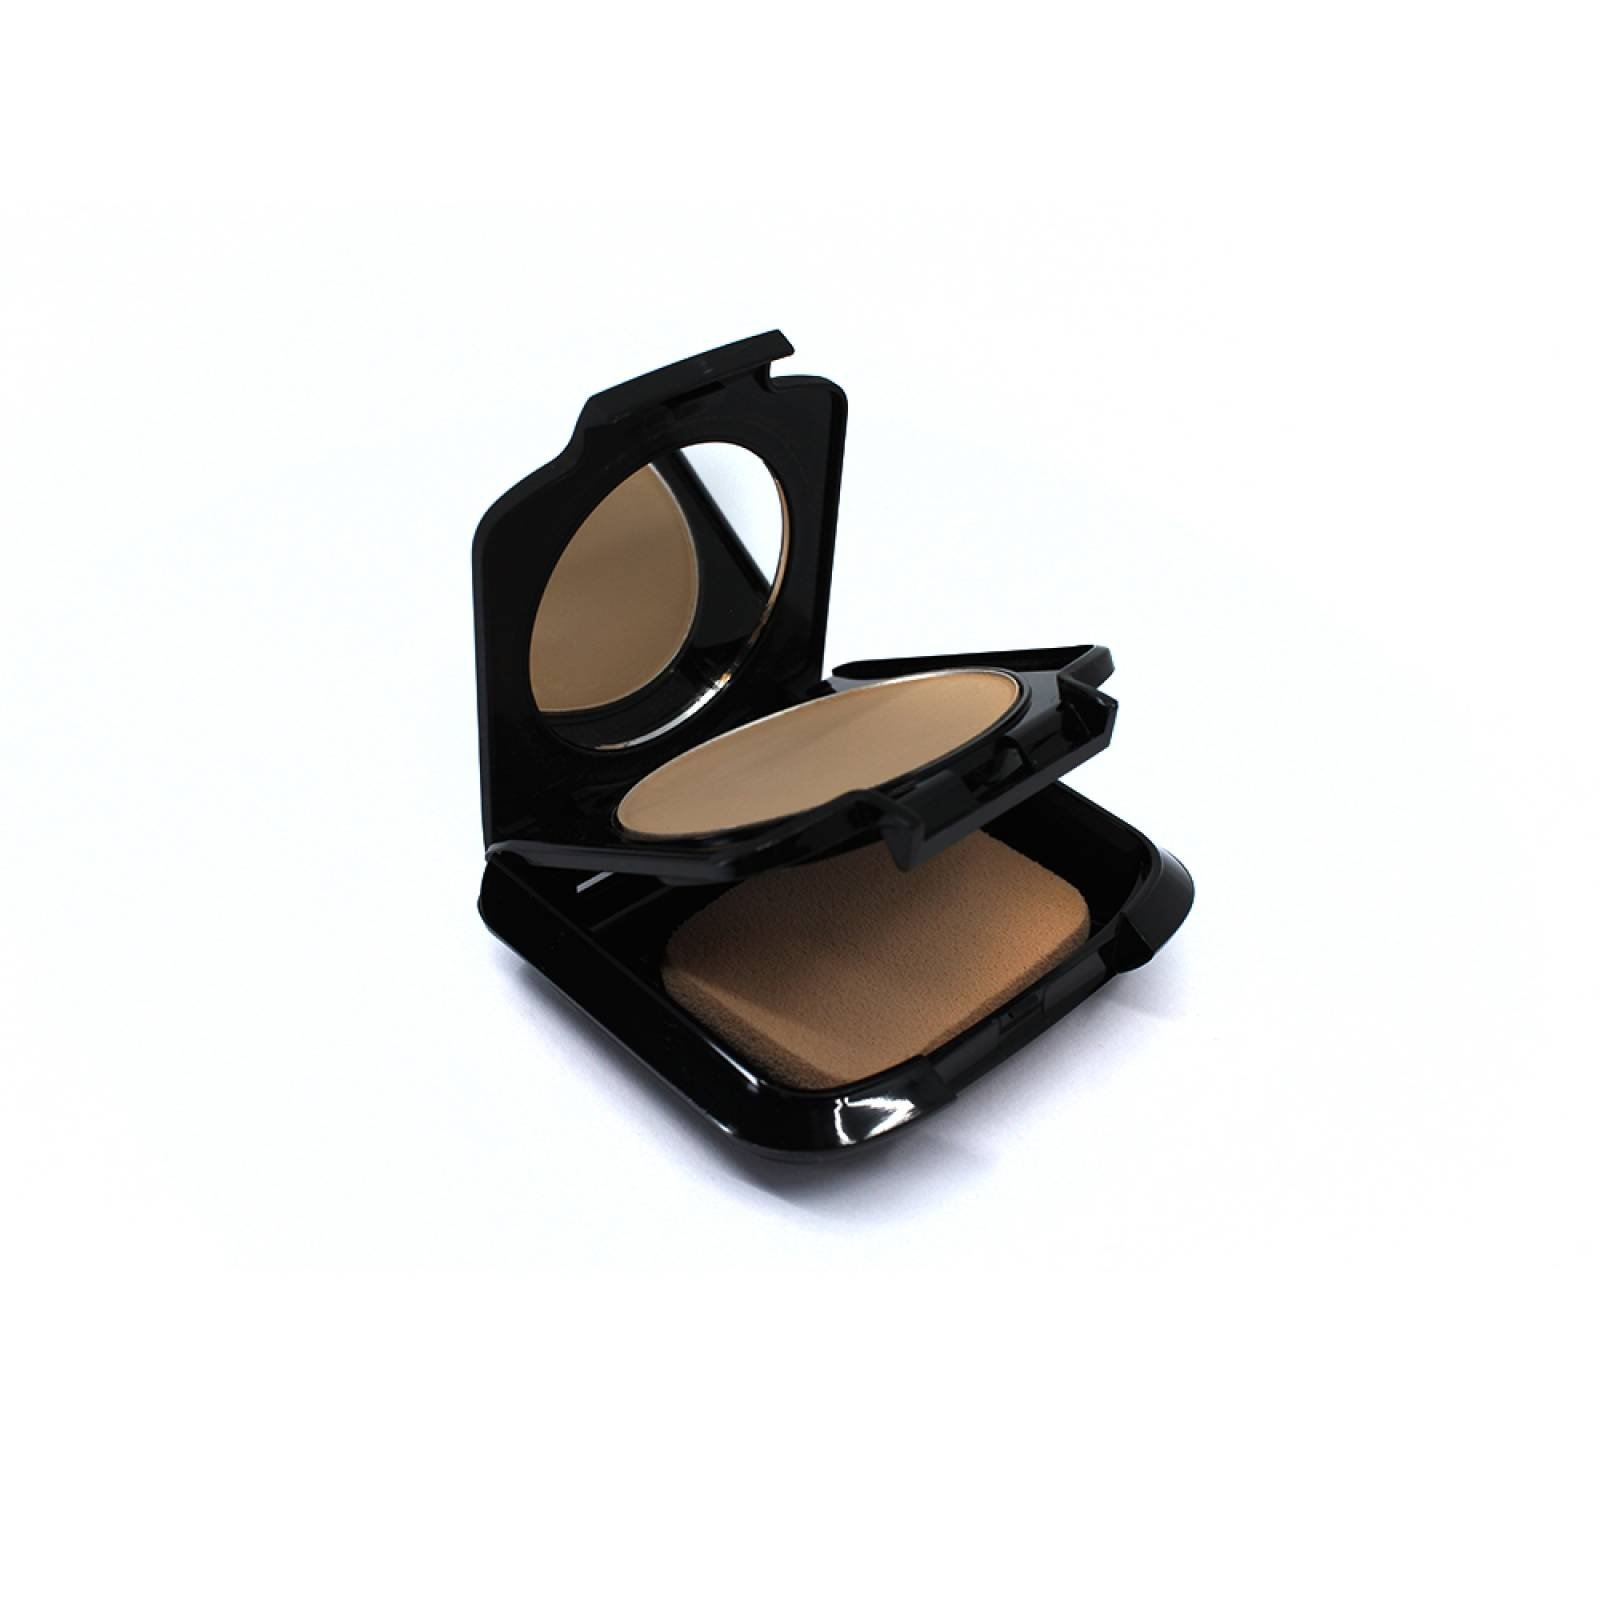 Maquillaje Polvo Mineral Doble Efecto Tonos Hollywood Image CREME BEIGE 33